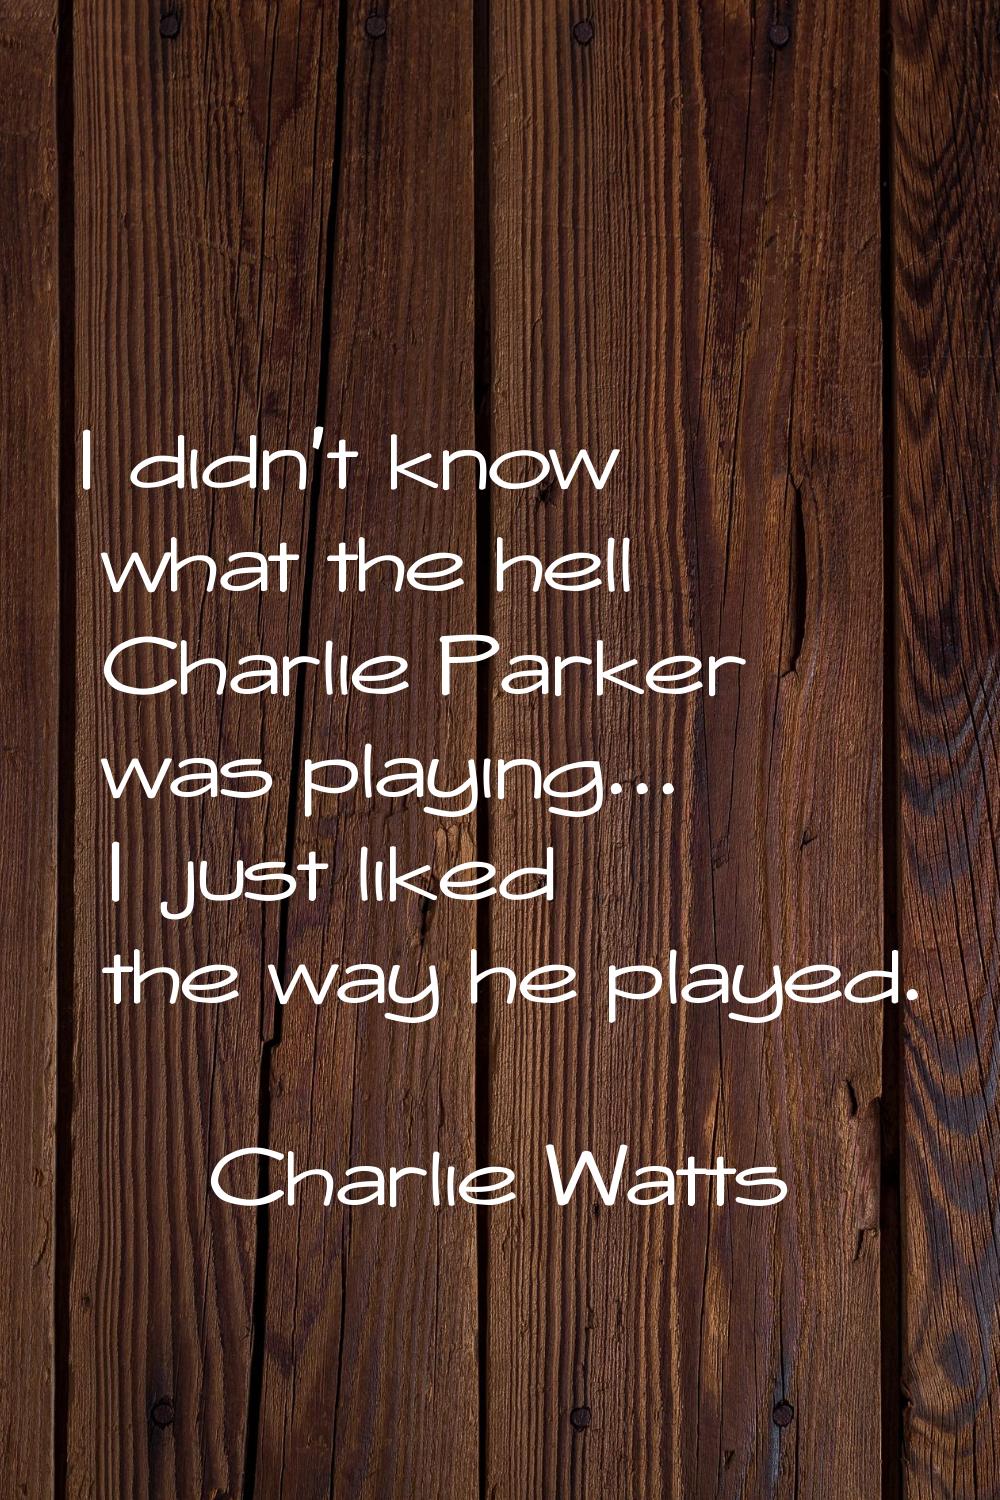 I didn't know what the hell Charlie Parker was playing... I just liked the way he played.